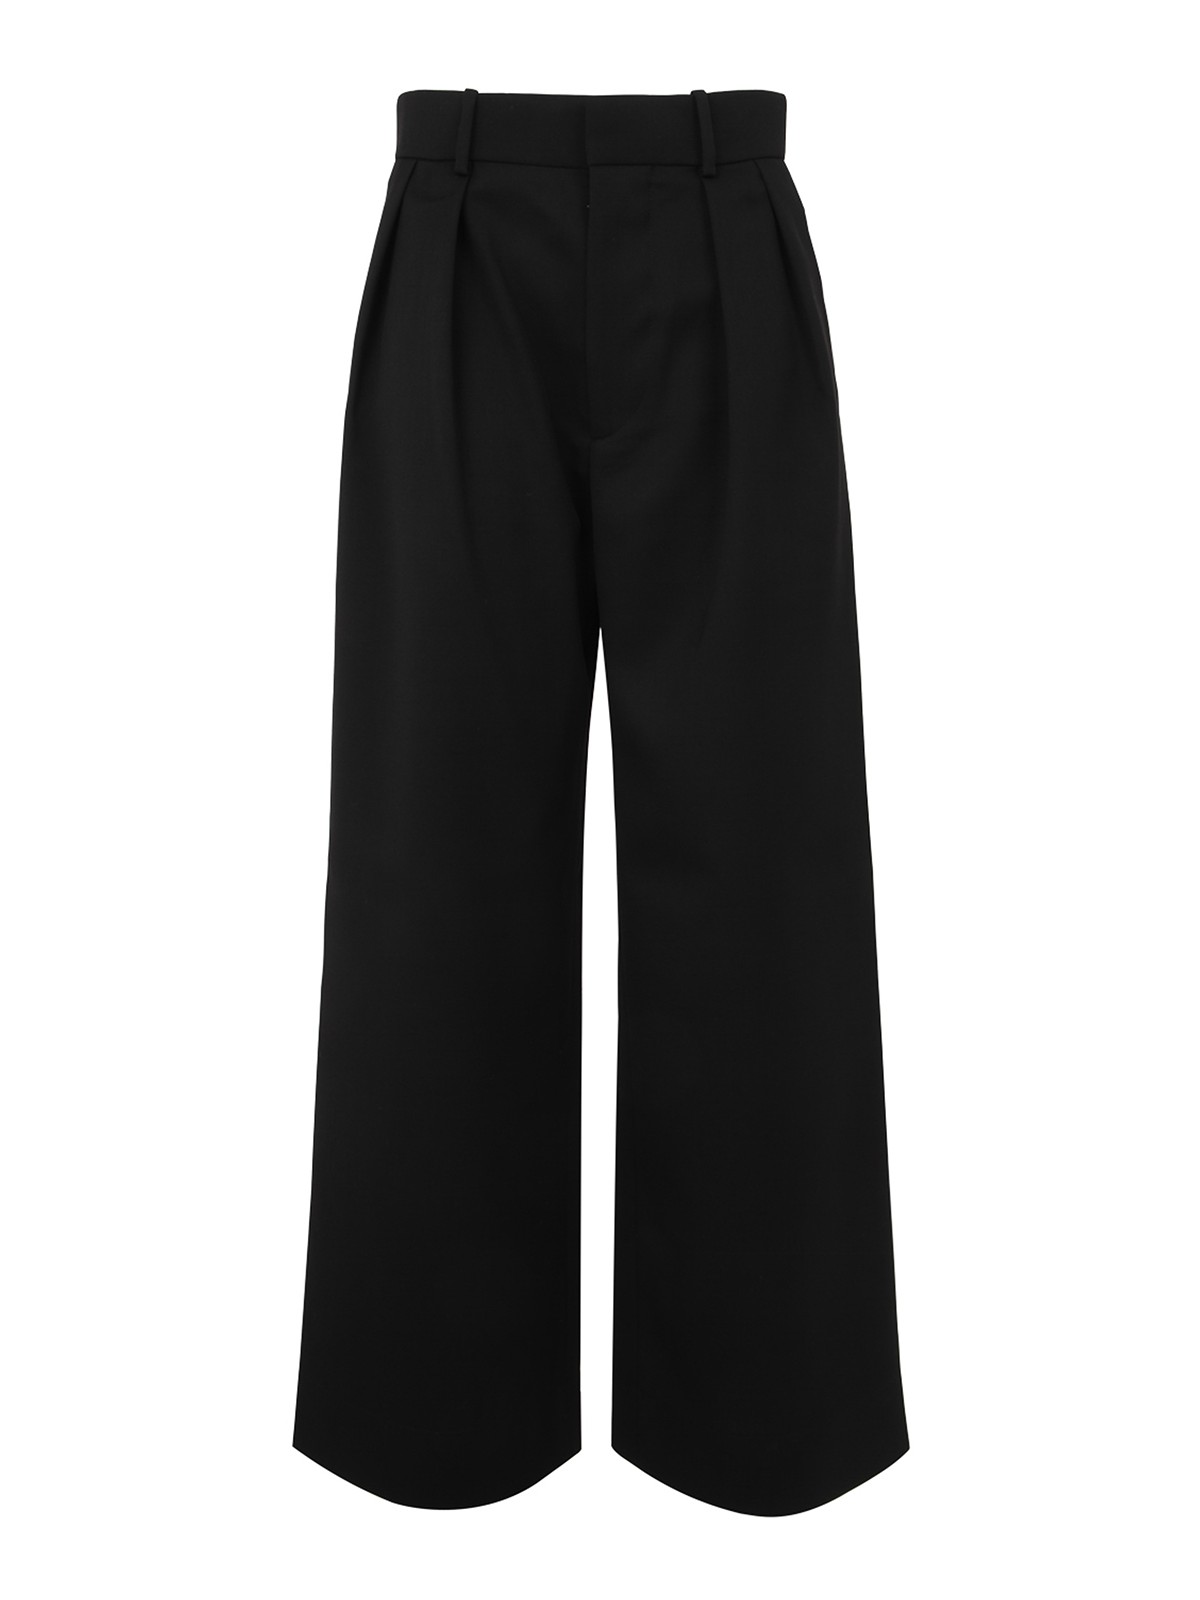 WARDdressing gown.NYC LOW RISE TROUSER